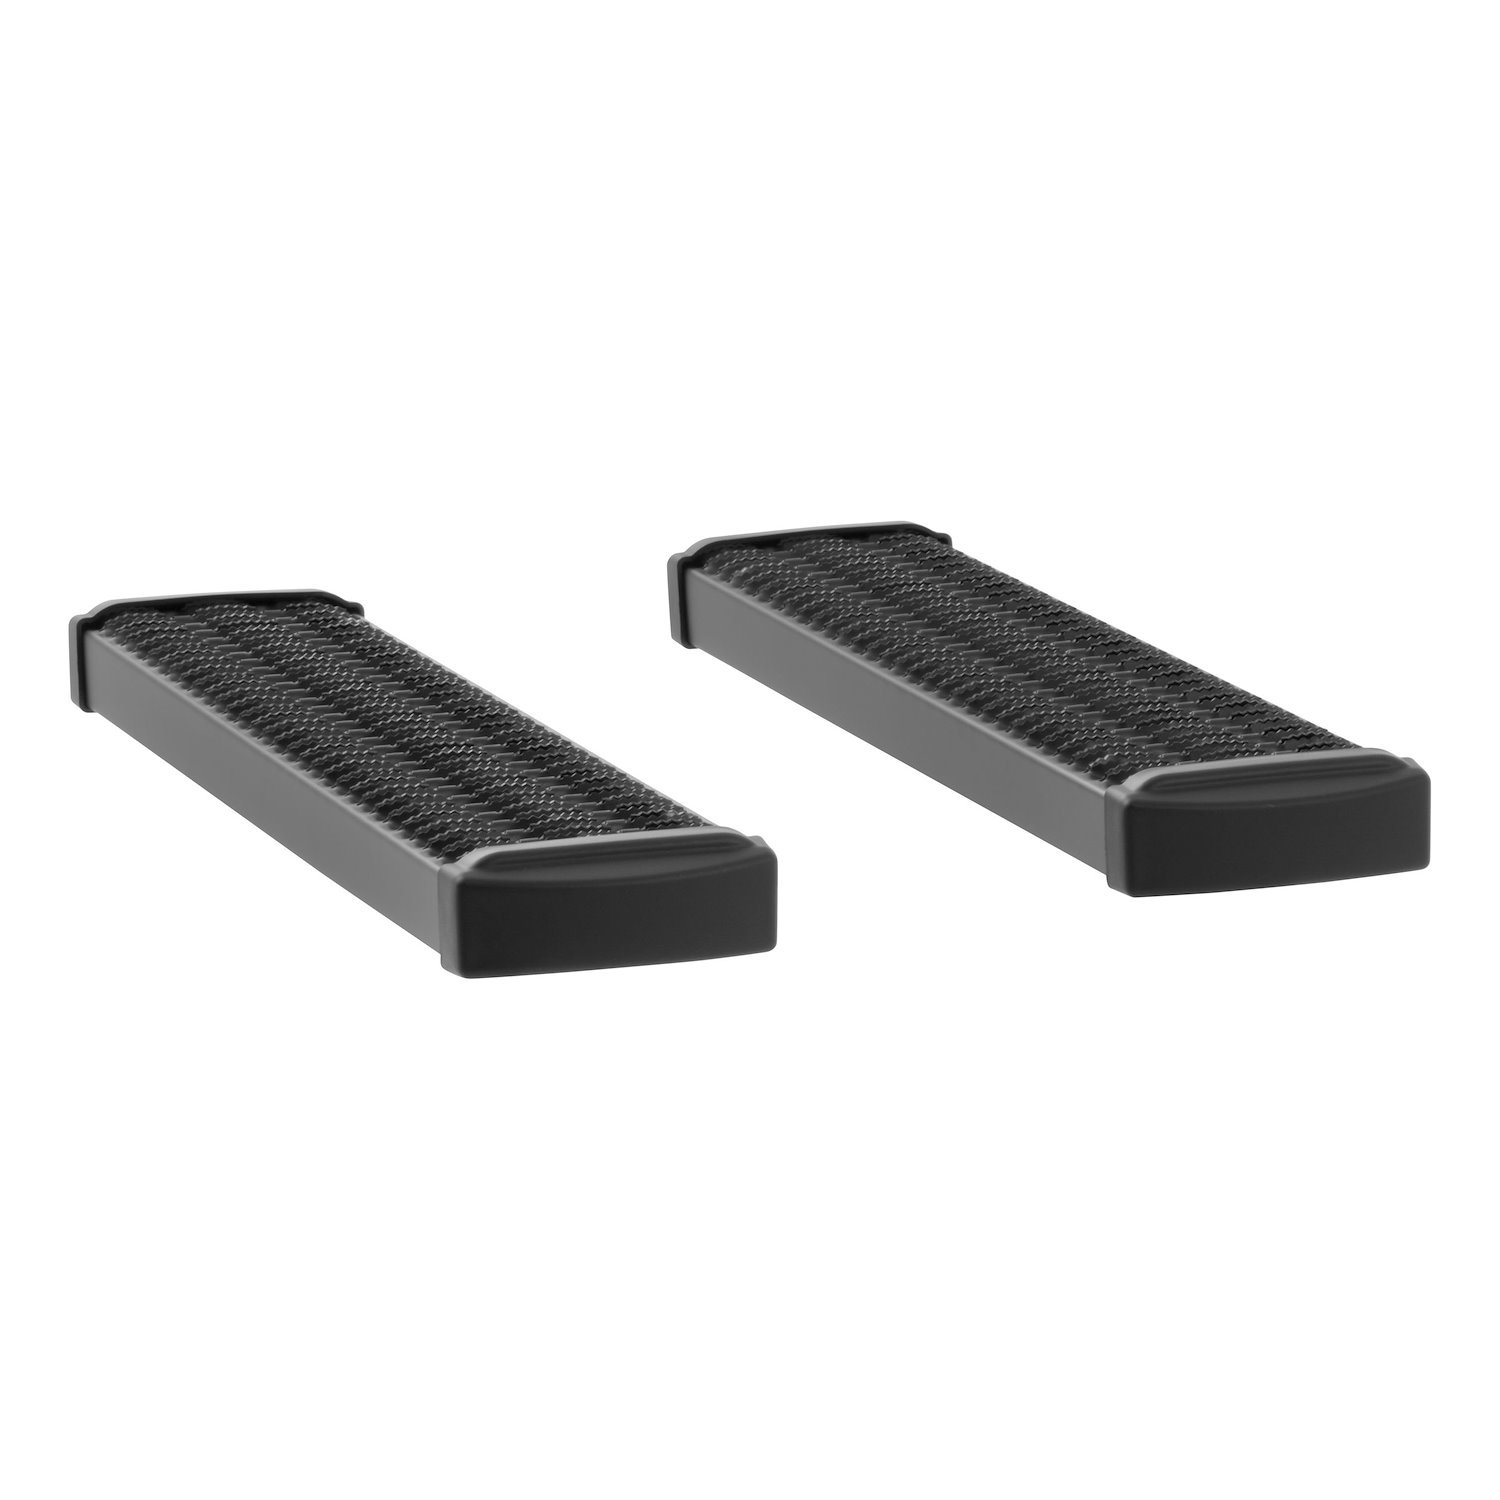 415036-570121 Grip Step 7 in. x 36 in. Black Aluminum Running Boards Fits Select Ford E-Series